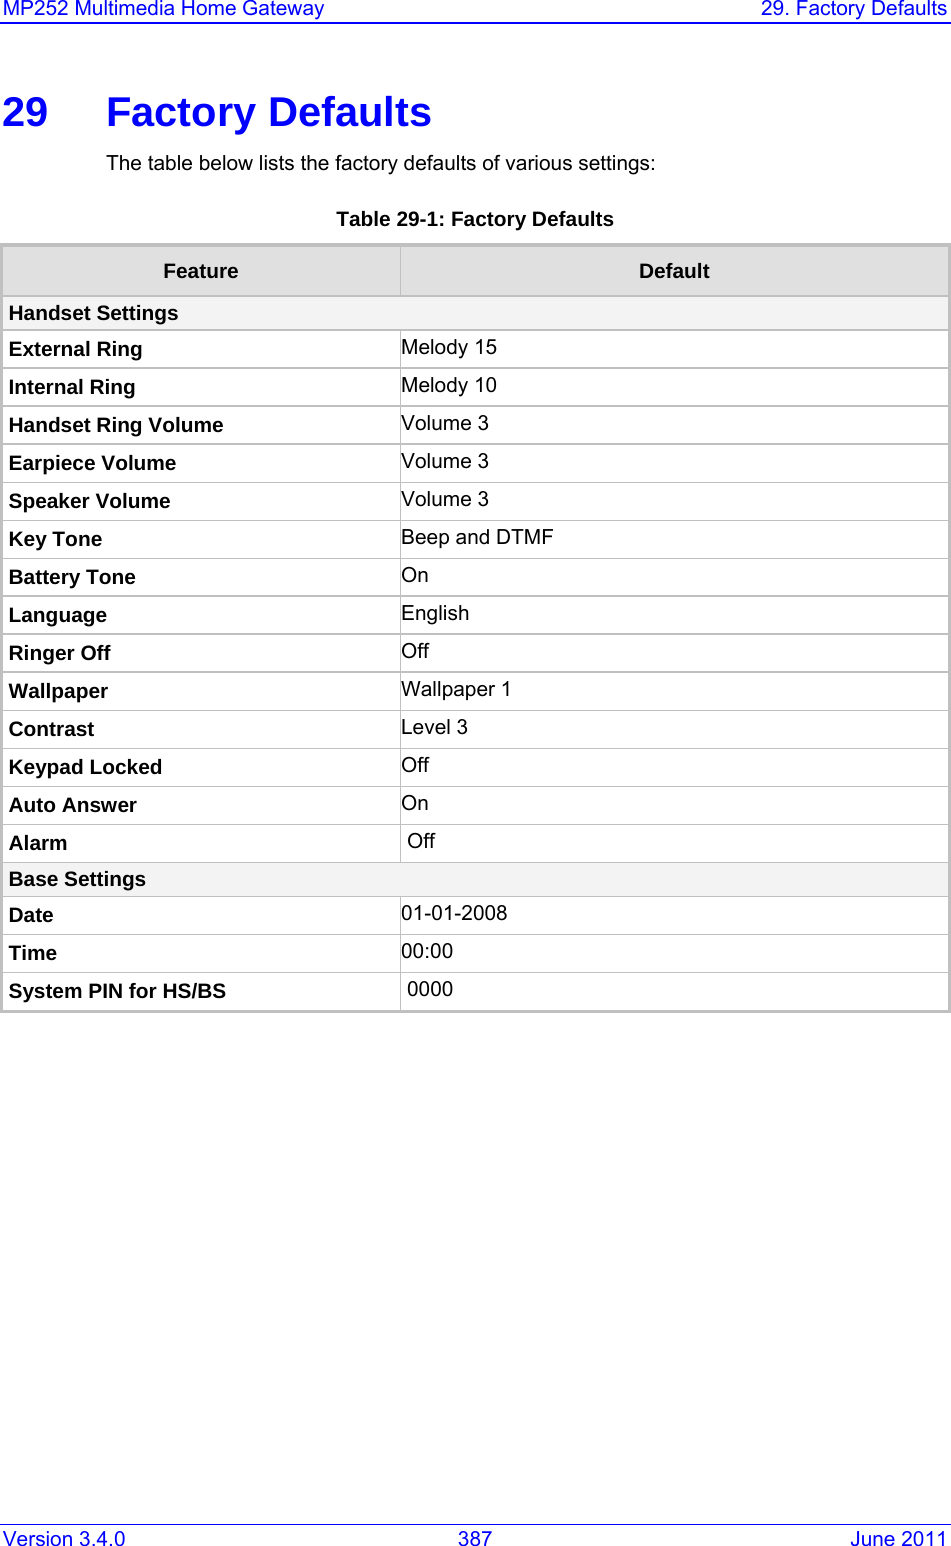 Version 3.4.0  387  June 2011 MP252 Multimedia Home Gateway  29. Factory Defaults  29 Factory Defaults The table below lists the factory defaults of various settings: Table 29-1: Factory Defaults Feature  Default Handset Settings External Ring  Melody 15 Internal Ring  Melody 10 Handset Ring Volume  Volume 3 Earpiece Volume  Volume 3 Speaker Volume  Volume 3 Key Tone  Beep and DTMF Battery Tone  On Language  English Ringer Off  Off Wallpaper  Wallpaper 1 Contrast  Level 3 Keypad Locked  Off Auto Answer  On Alarm  Off Base Settings Date  01-01-2008 Time  00:00 System PIN for HS/BS  0000      